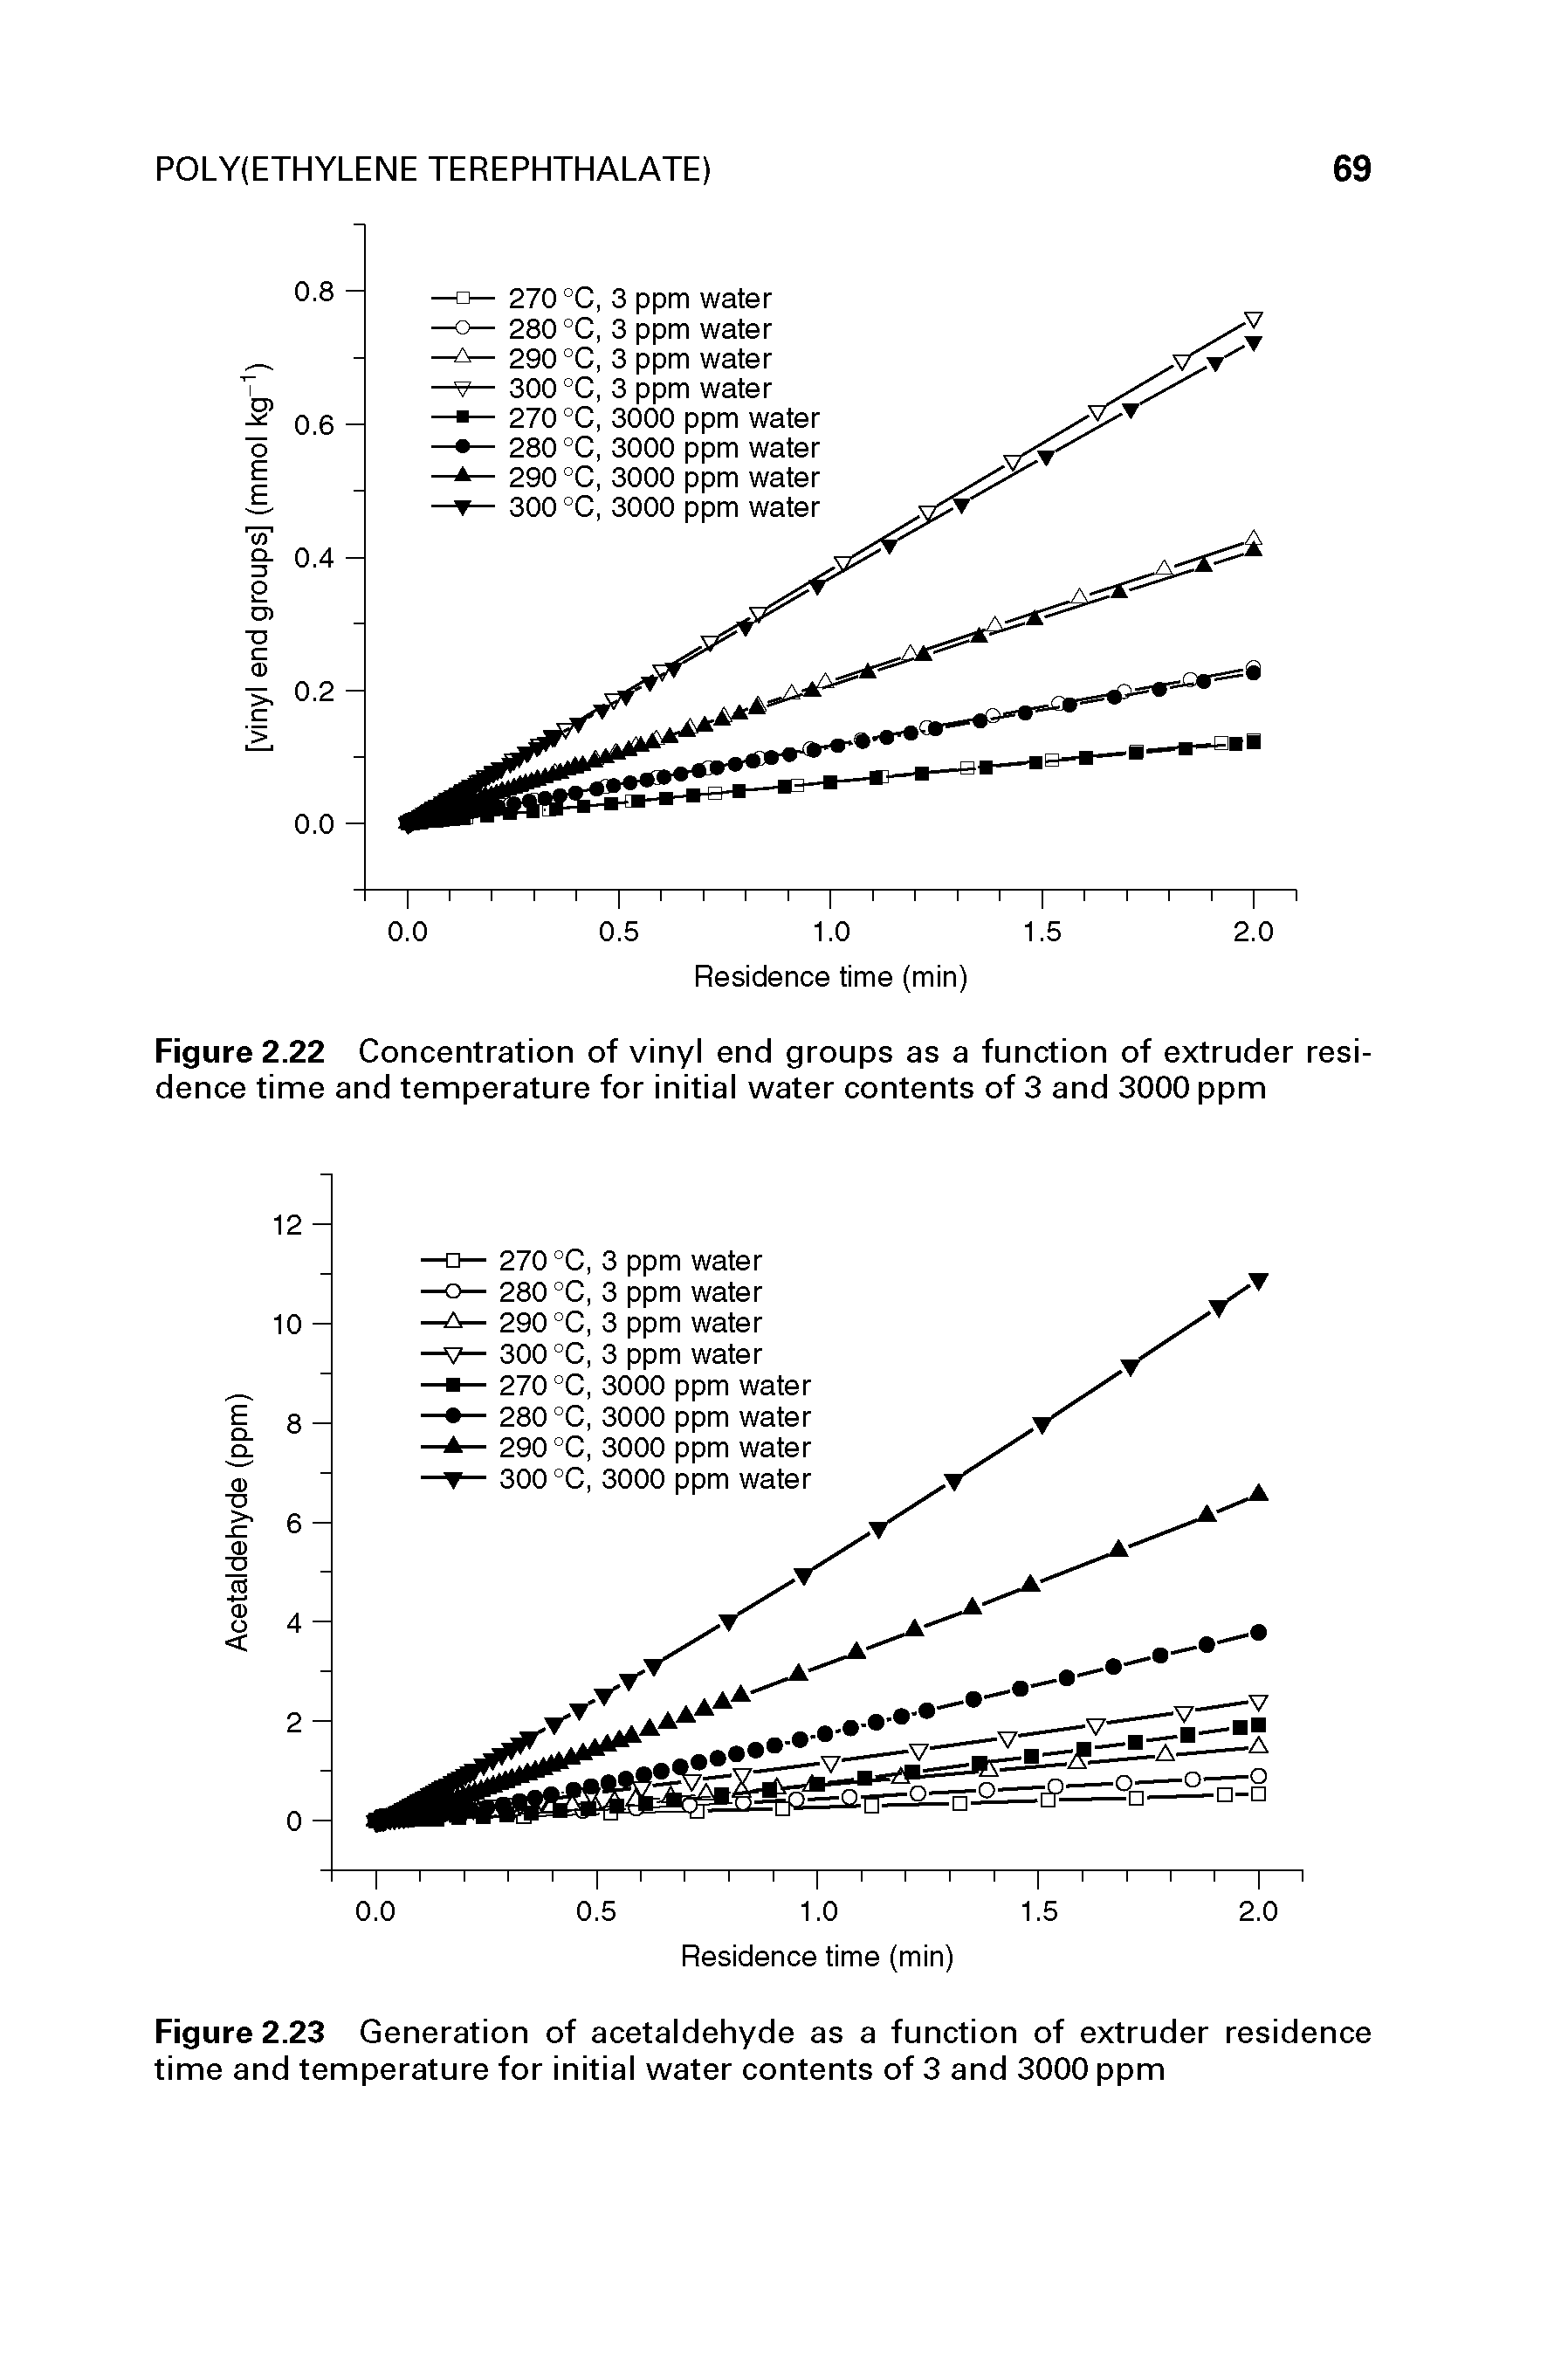 Figure 2.22 Concentration of vinyl end groups as a function of extruder residence time and temperature for initial water contents of 3 and 3000 ppm...